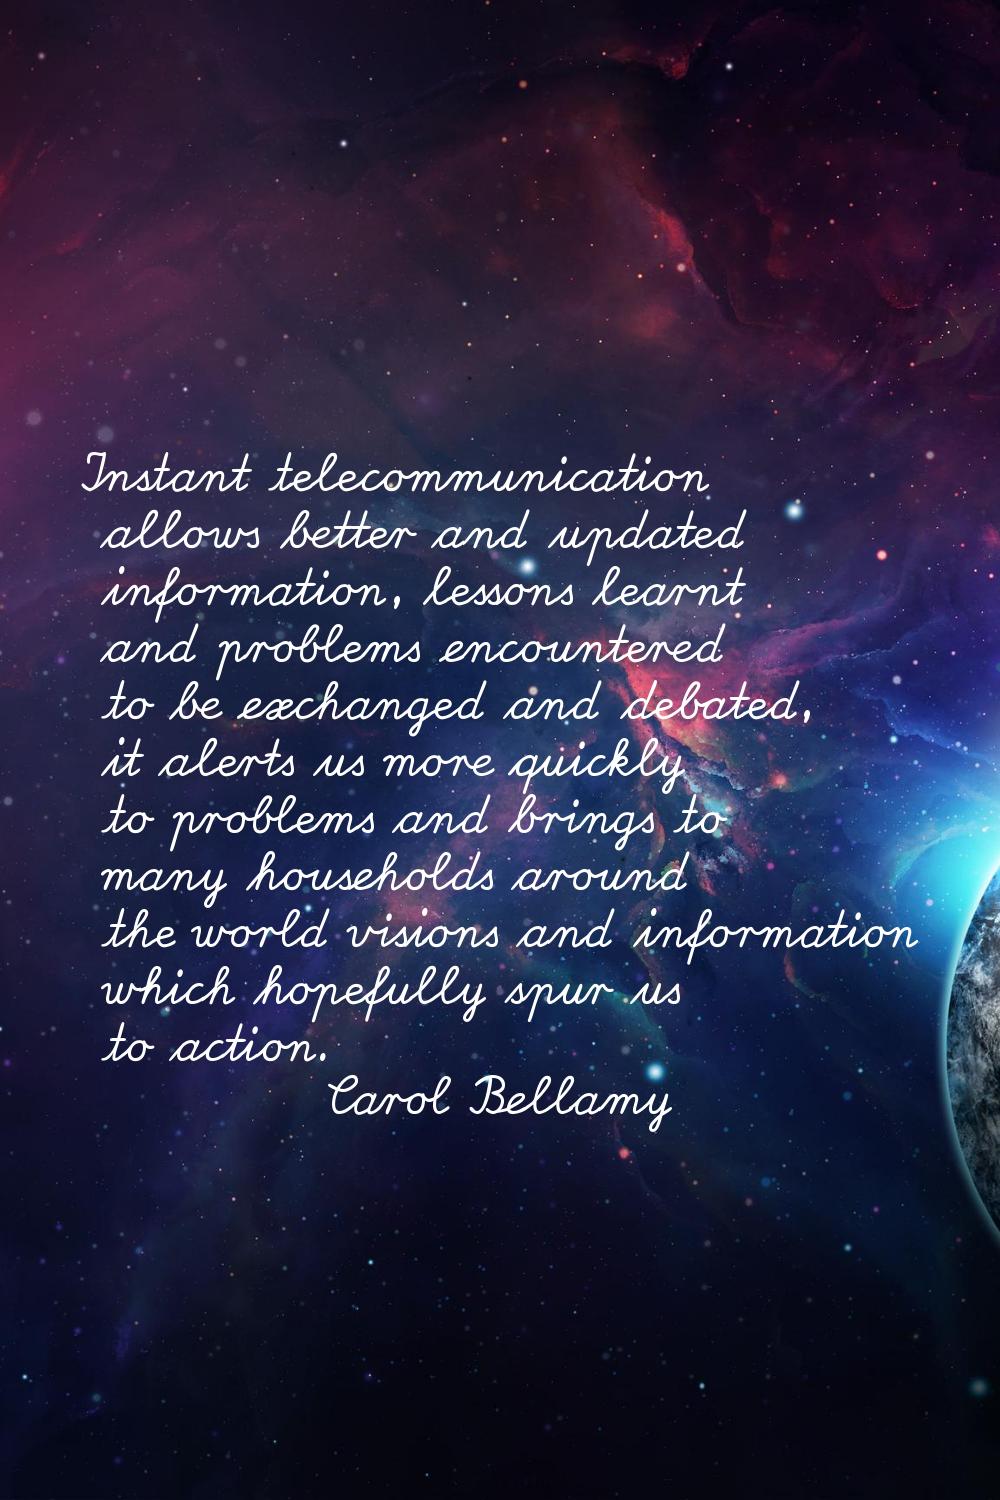 Instant telecommunication allows better and updated information, lessons learnt and problems encoun